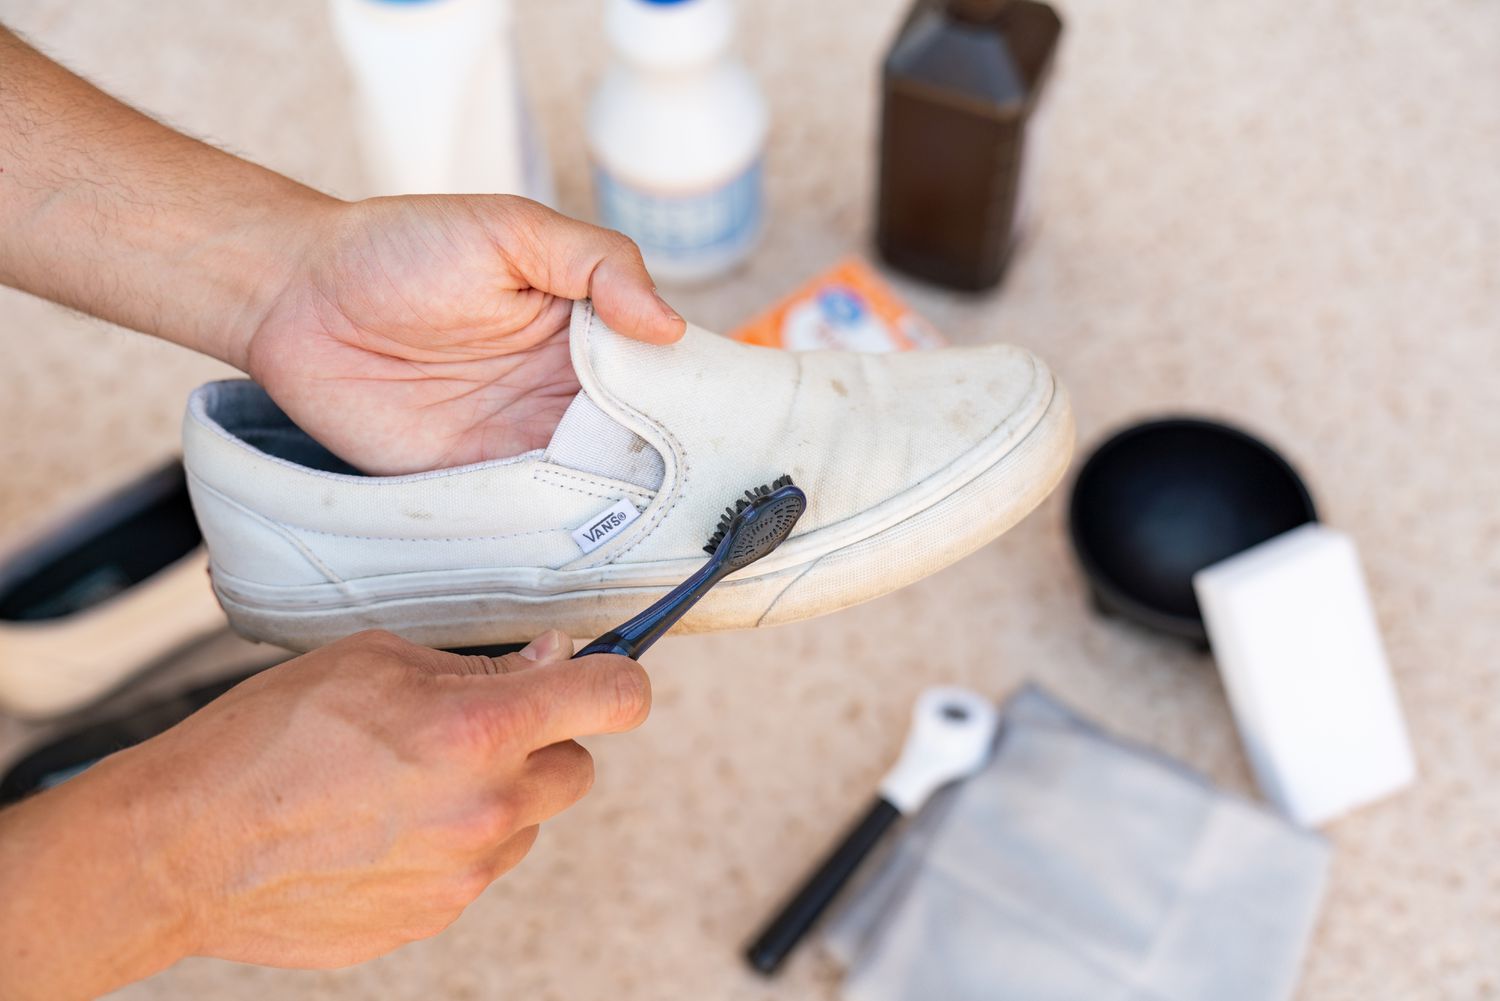 How to clean Vans tennis shoes in white by hand